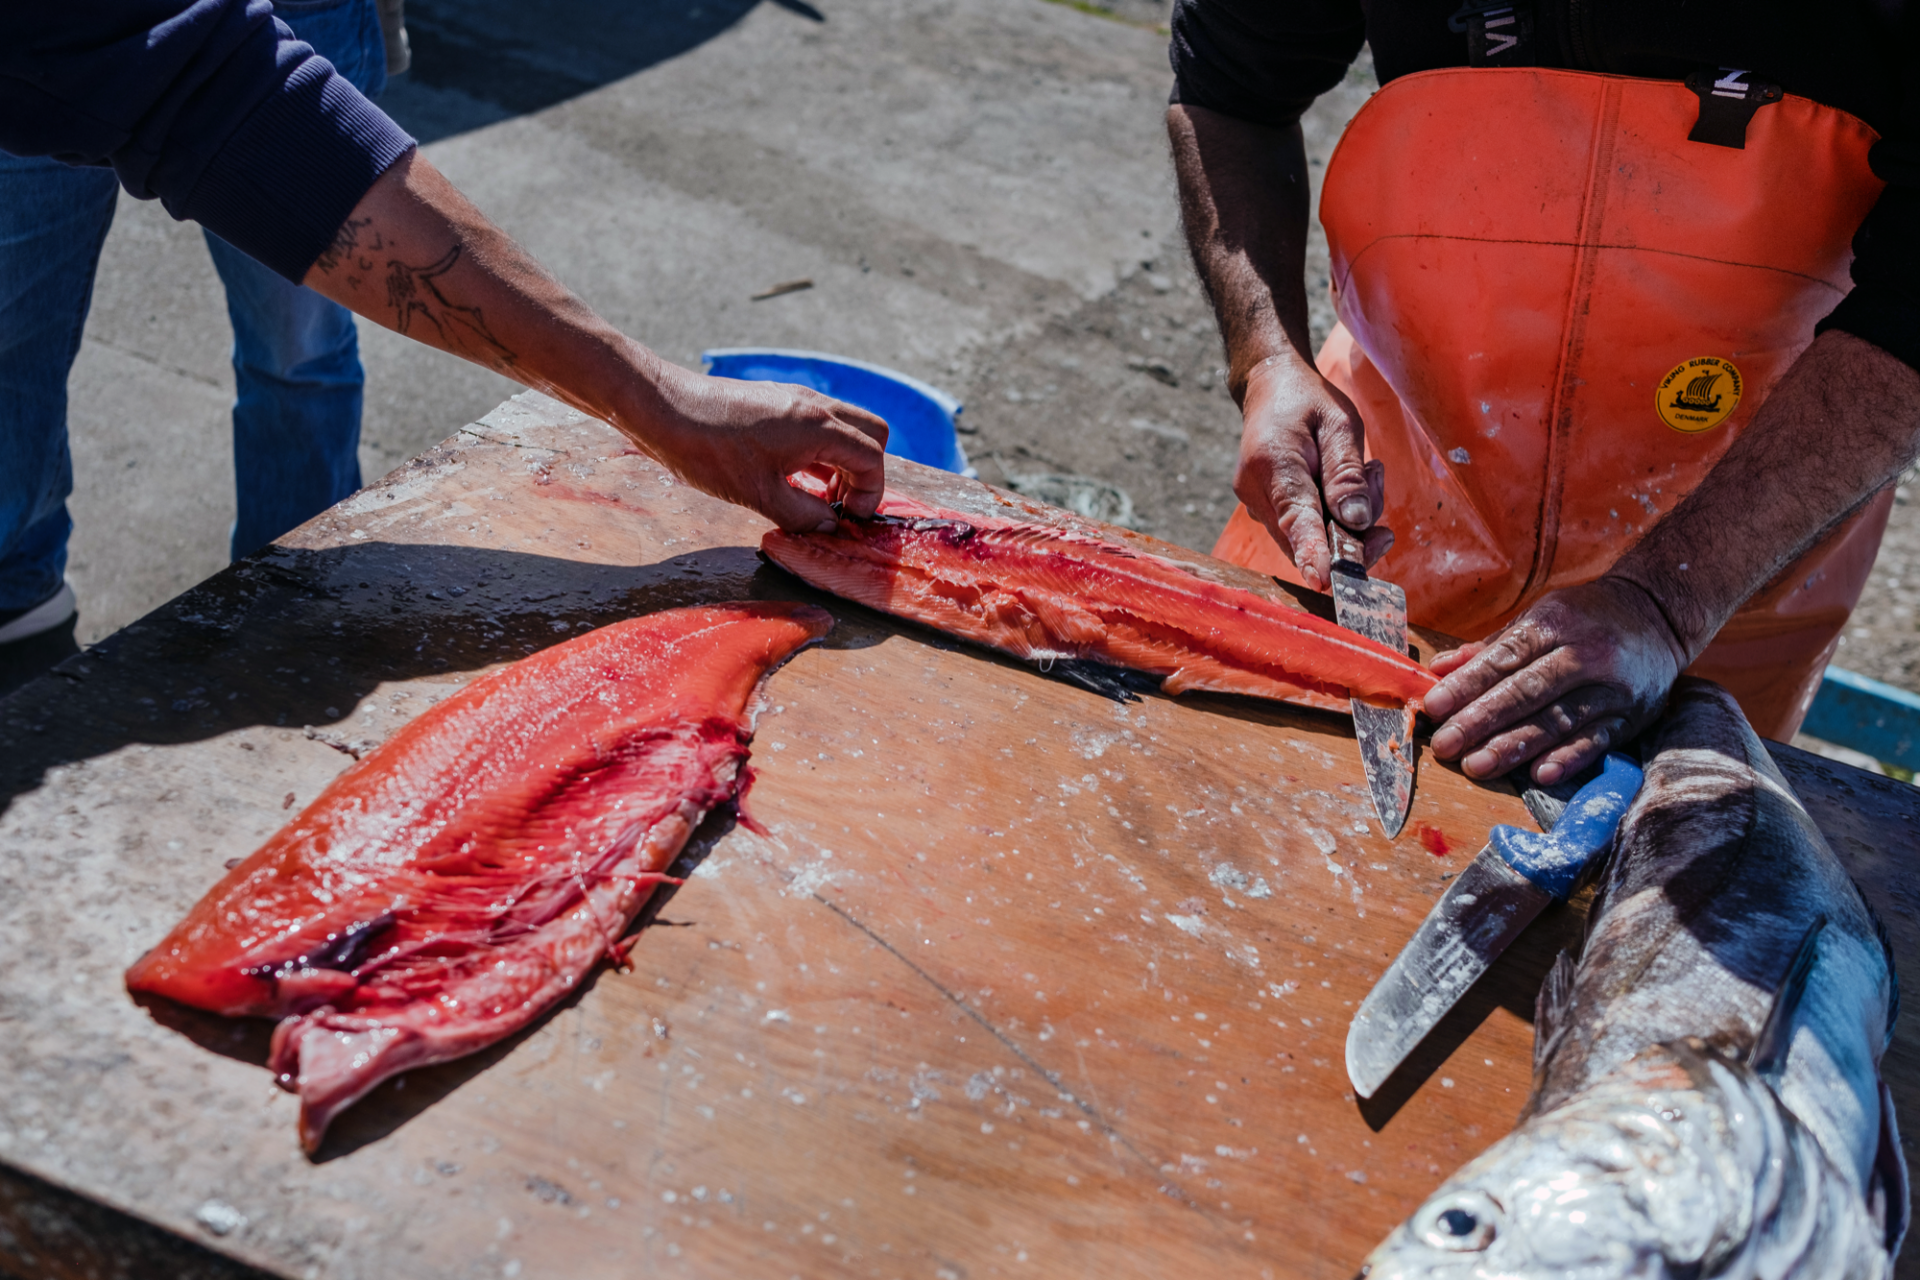 Artisanal fishermen in Puerto Montt butcher the salmon that have bitten the hook on their fishing line. This phenomenon is unusual and only occurs when there are salmon escapes from the aquaculture cages of the salmon industry. (Photo: Cristobal Venegas)